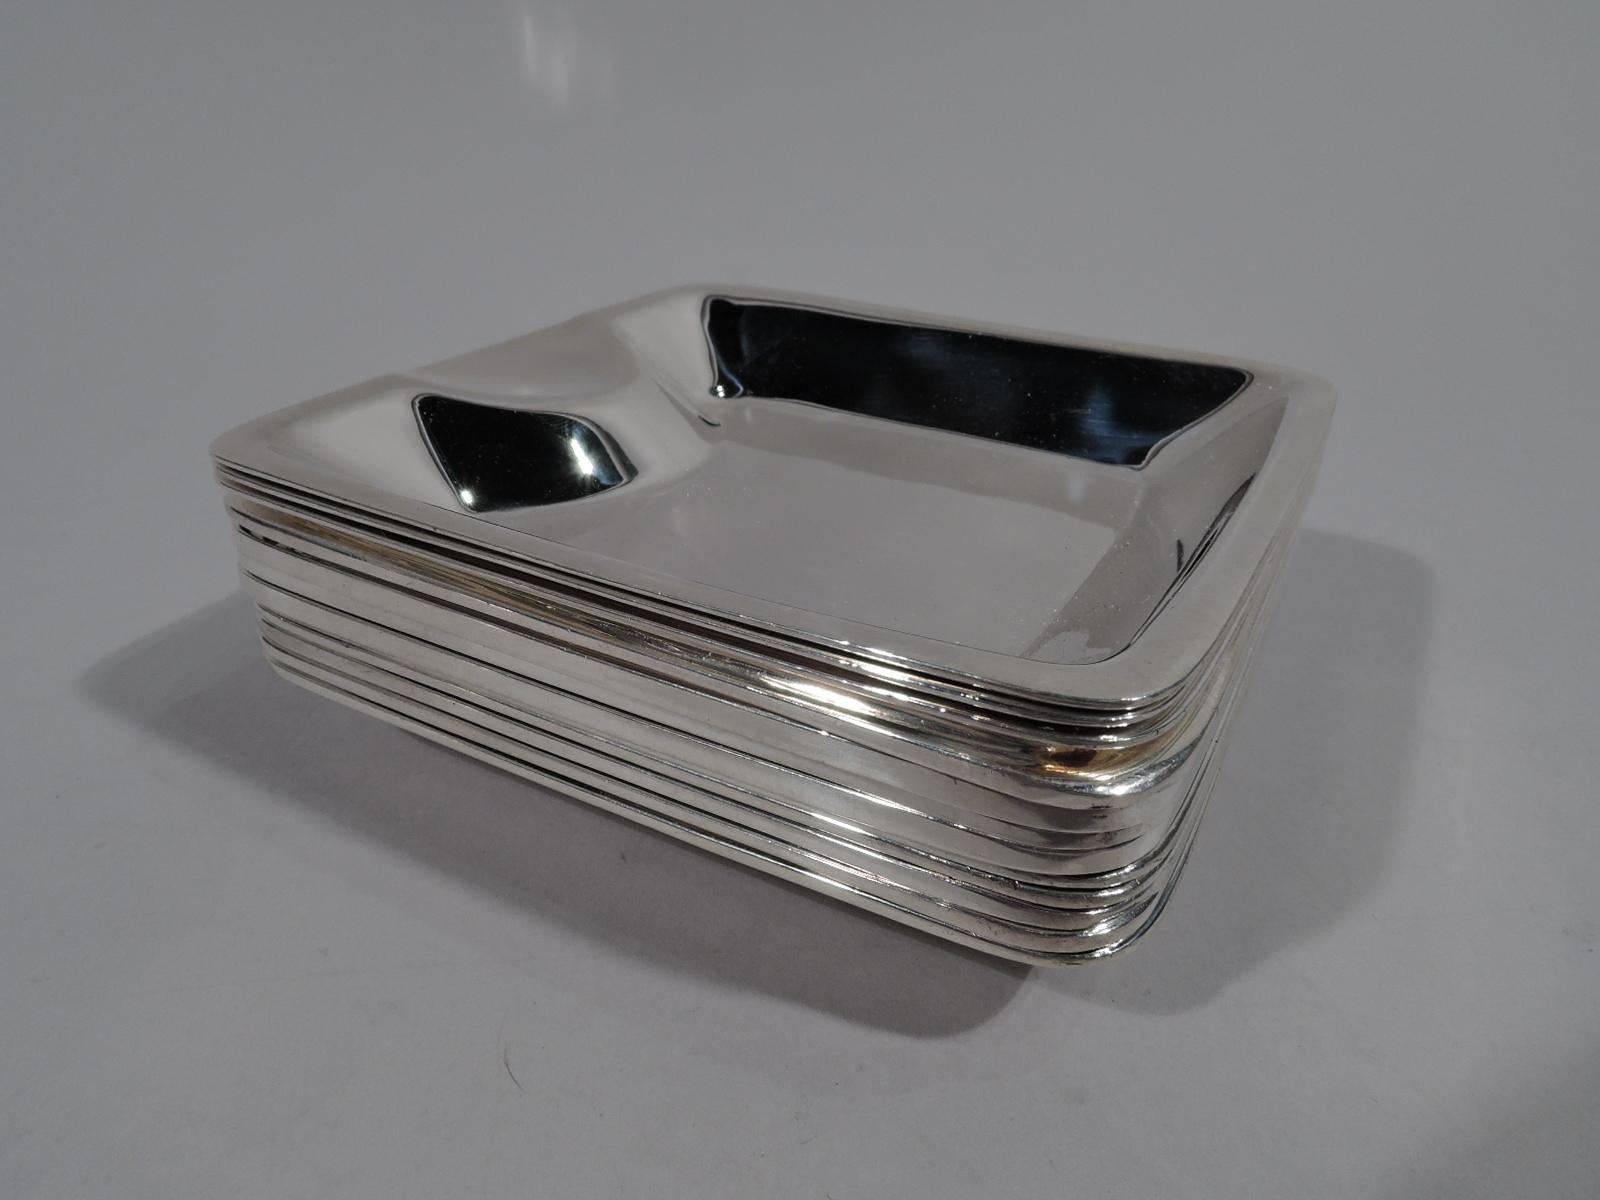 Set of 12 sterling silver ashtrays. Made by Tiffany & Co. in New York. Each: Rectangular with tapering sides and concave ovalish cradle. The individual size that makes smoking look stylish. Dangerous table accessories. Fully marked. Six have